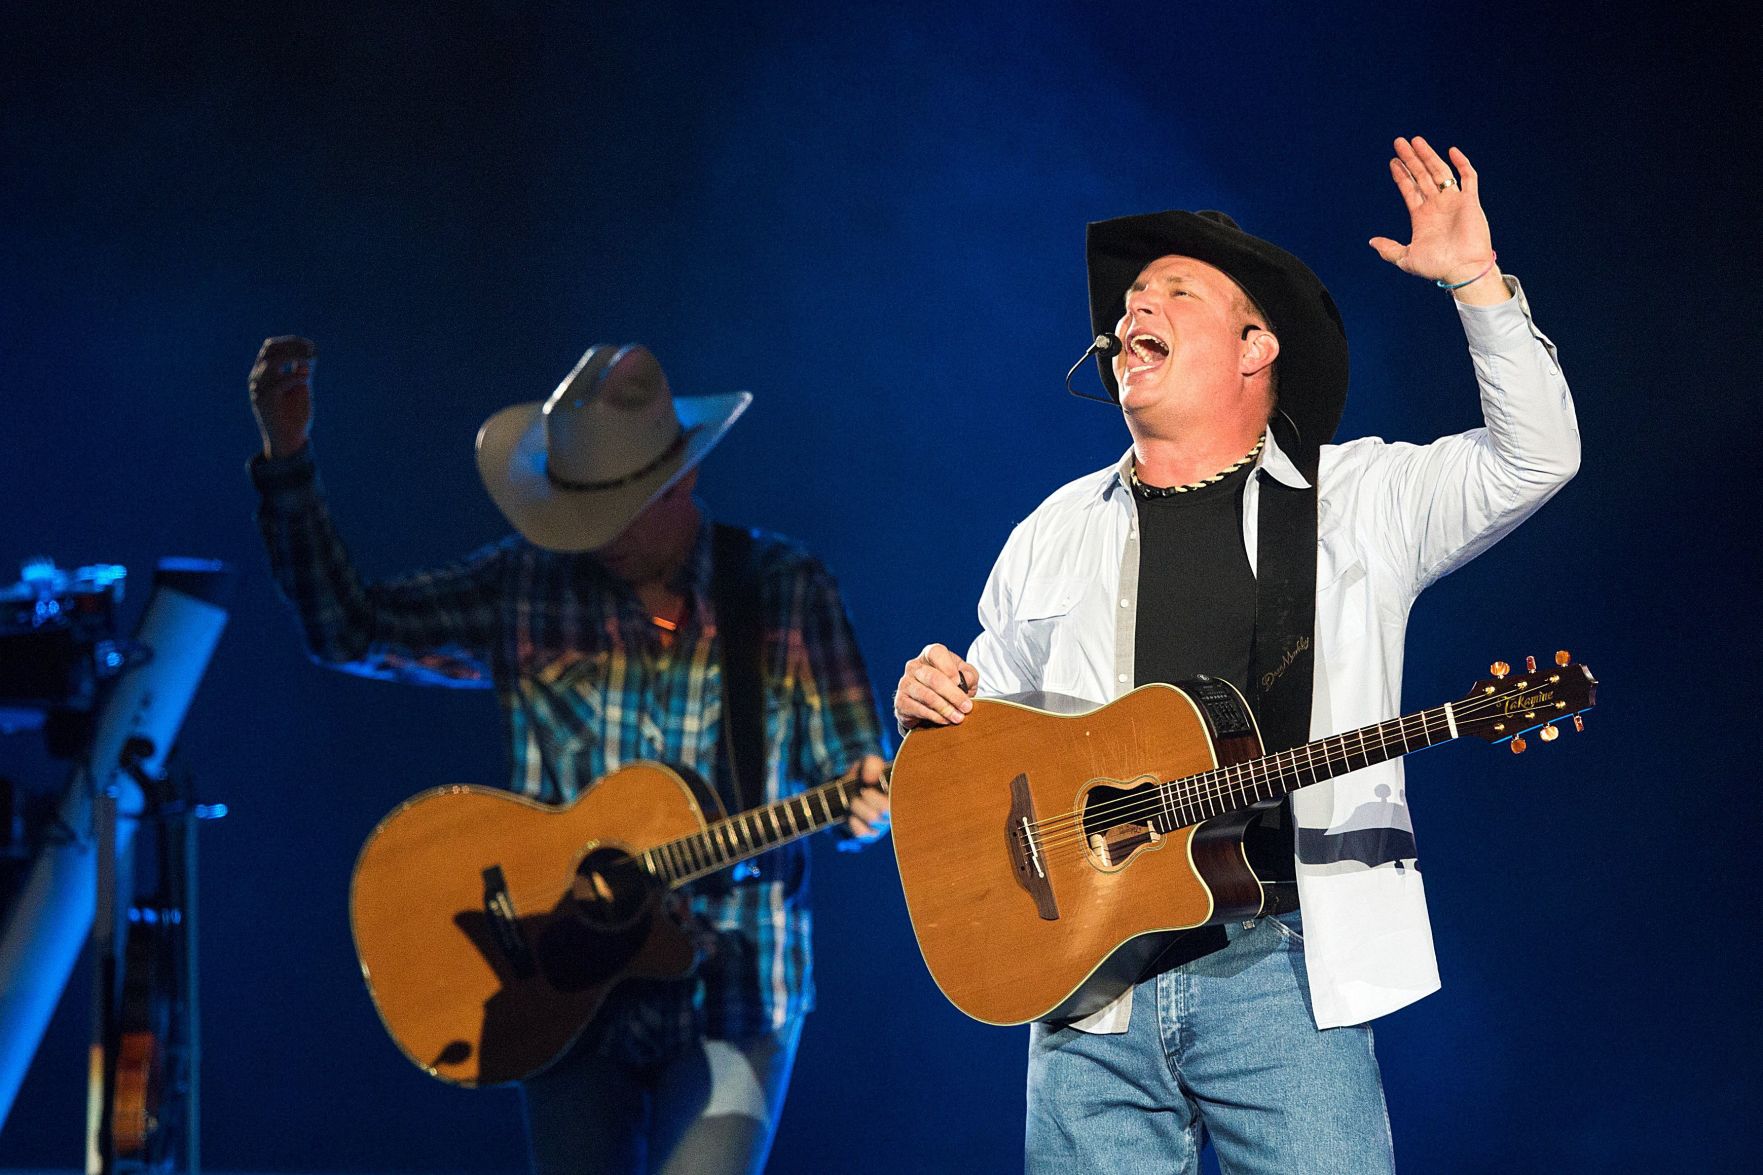 Memorial Stadium officials say they're working to make Garth